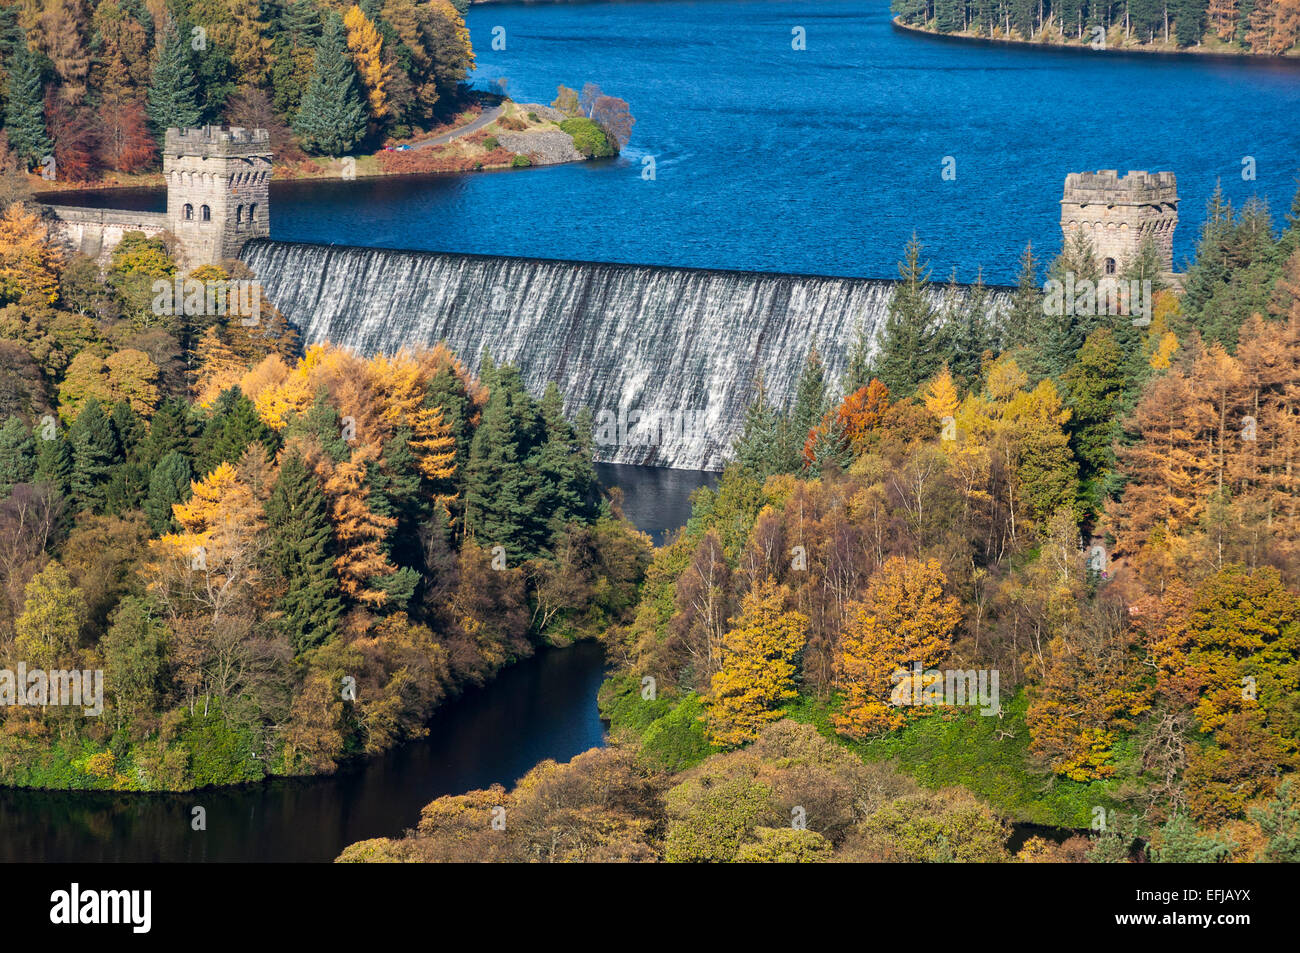 Howden dam in the Derwent valley with rich autumn colours in the landscape. A beautiful place in the Peak District, Derbyshire, England. Stock Photo